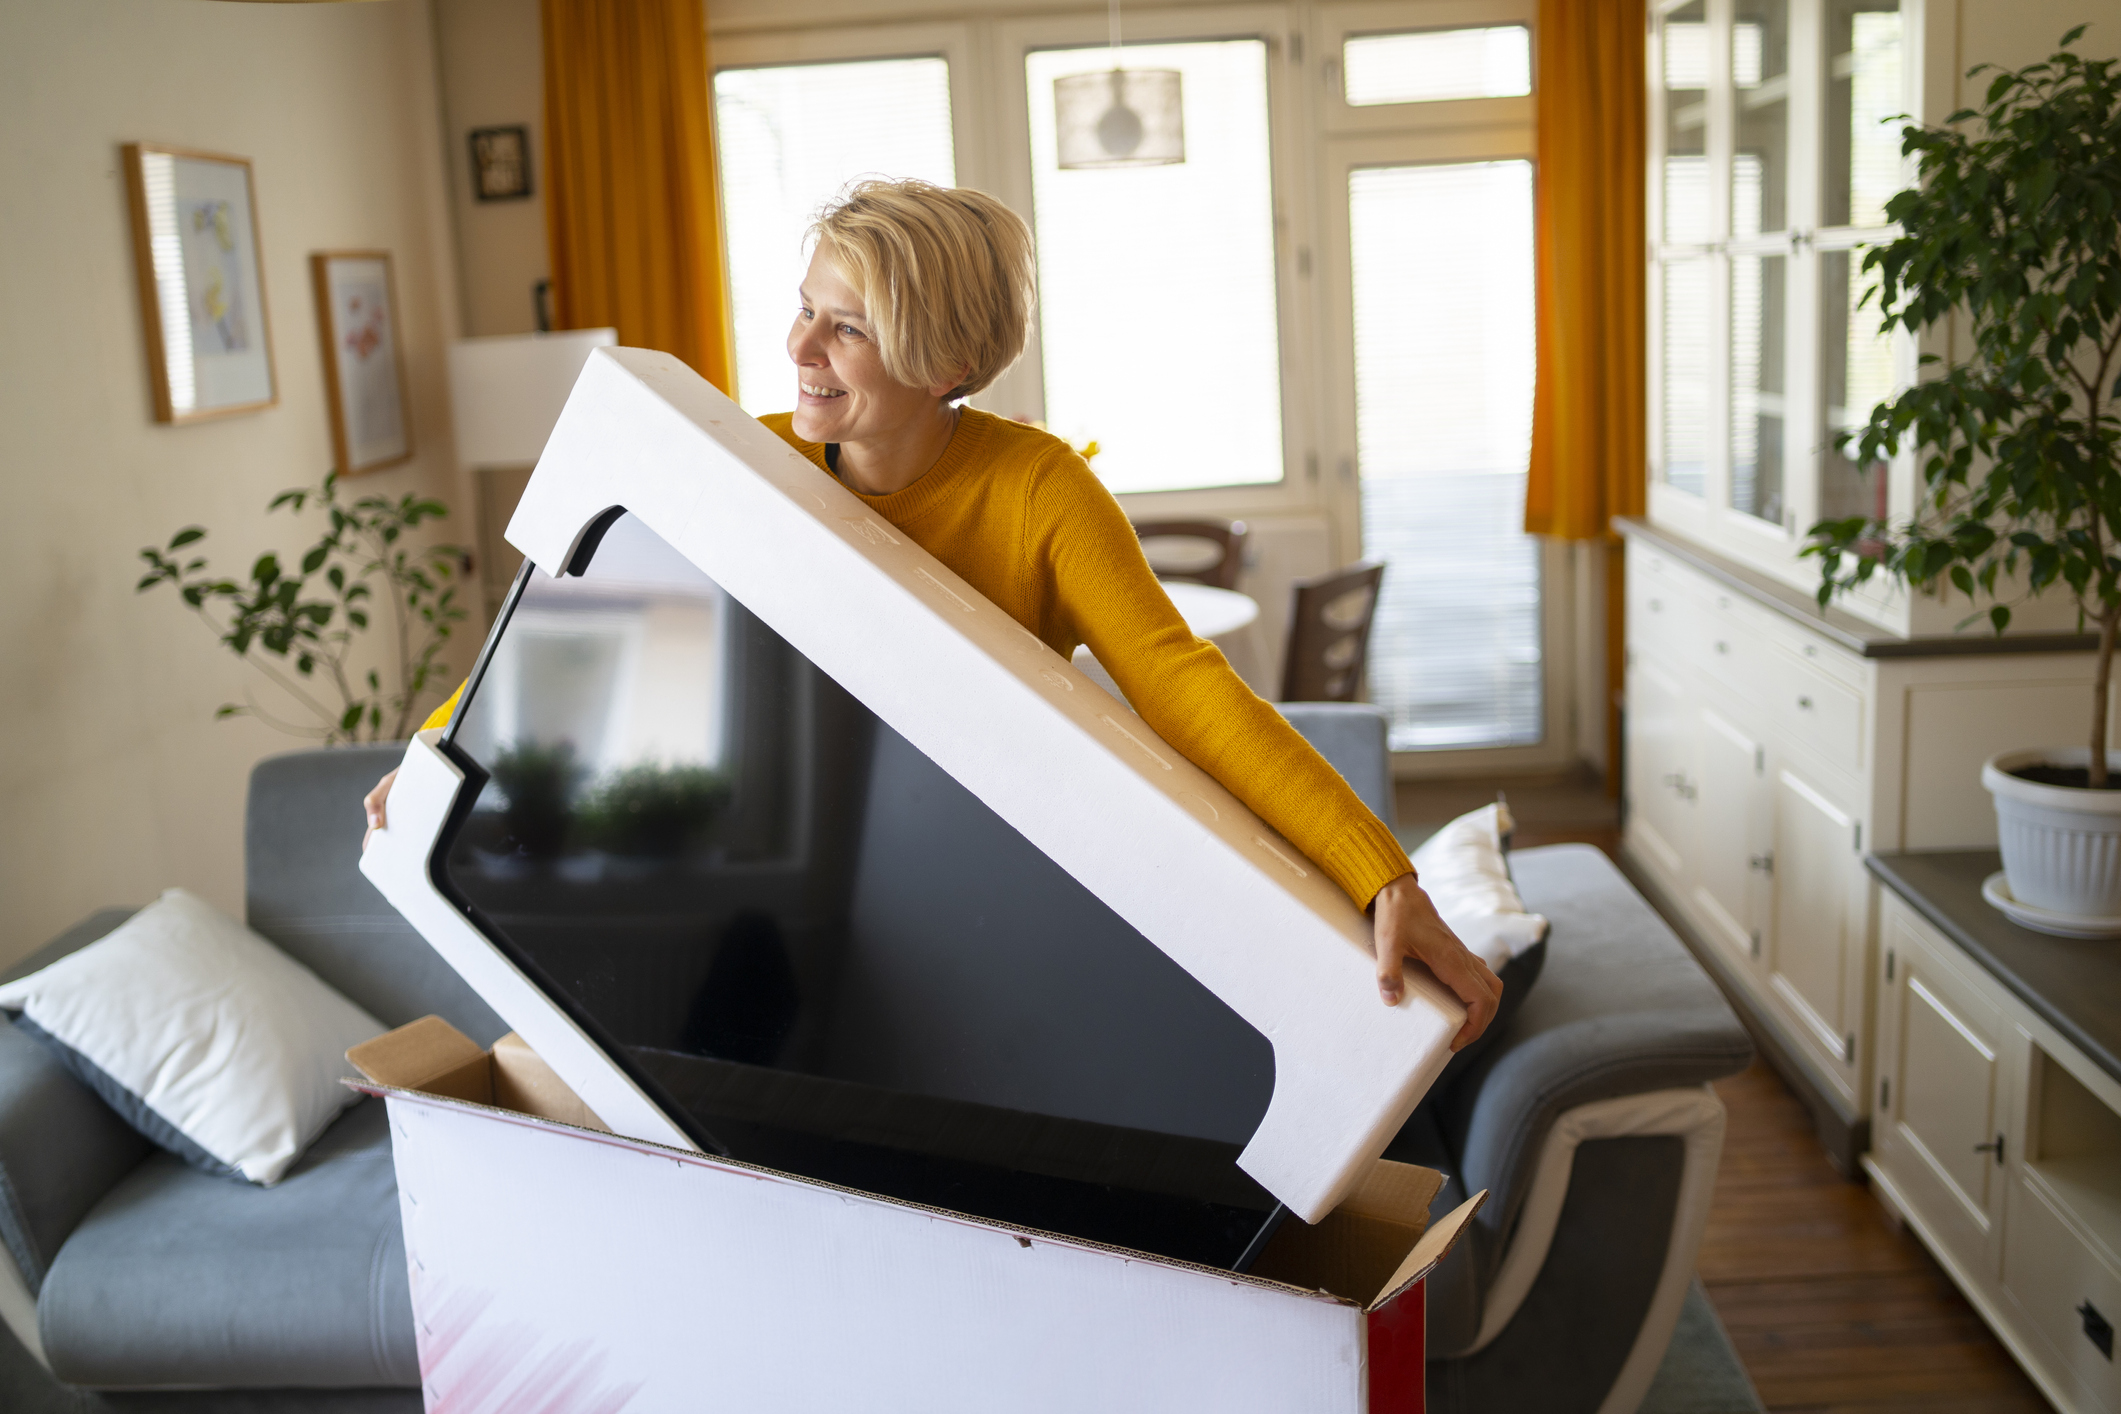 An online shopper lifts her new purchase from its box